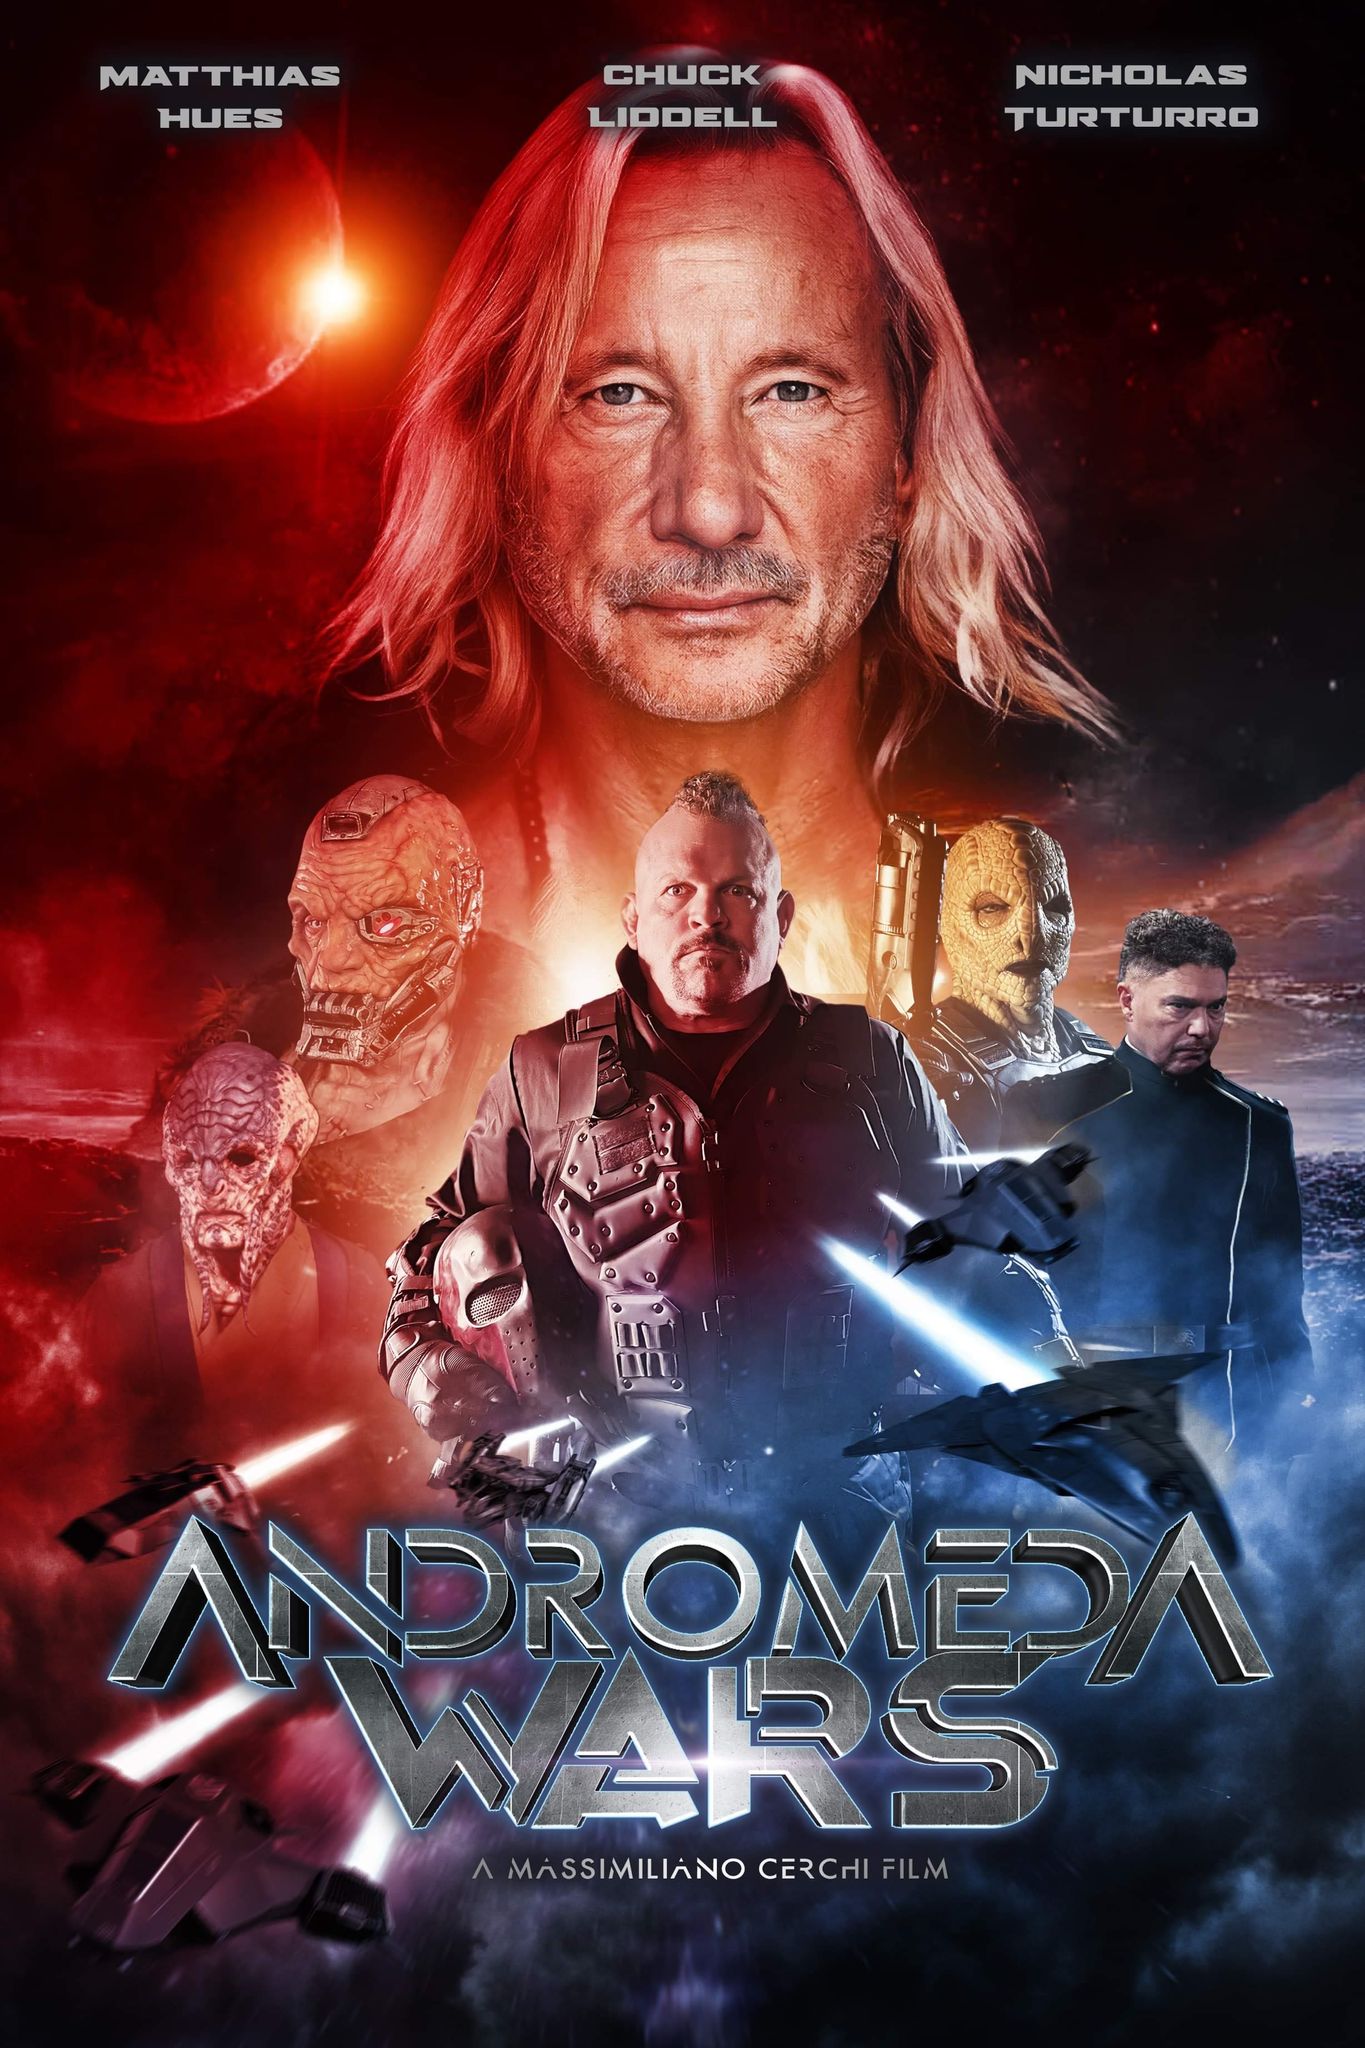 New Retro 80's Key Art Drops for the SCI-FI/Actioner ANDROMEDA WARS  Starring Matthias Hues & Chuck Liddell! Trailer Dropping Soon! – ACTION-FLIX